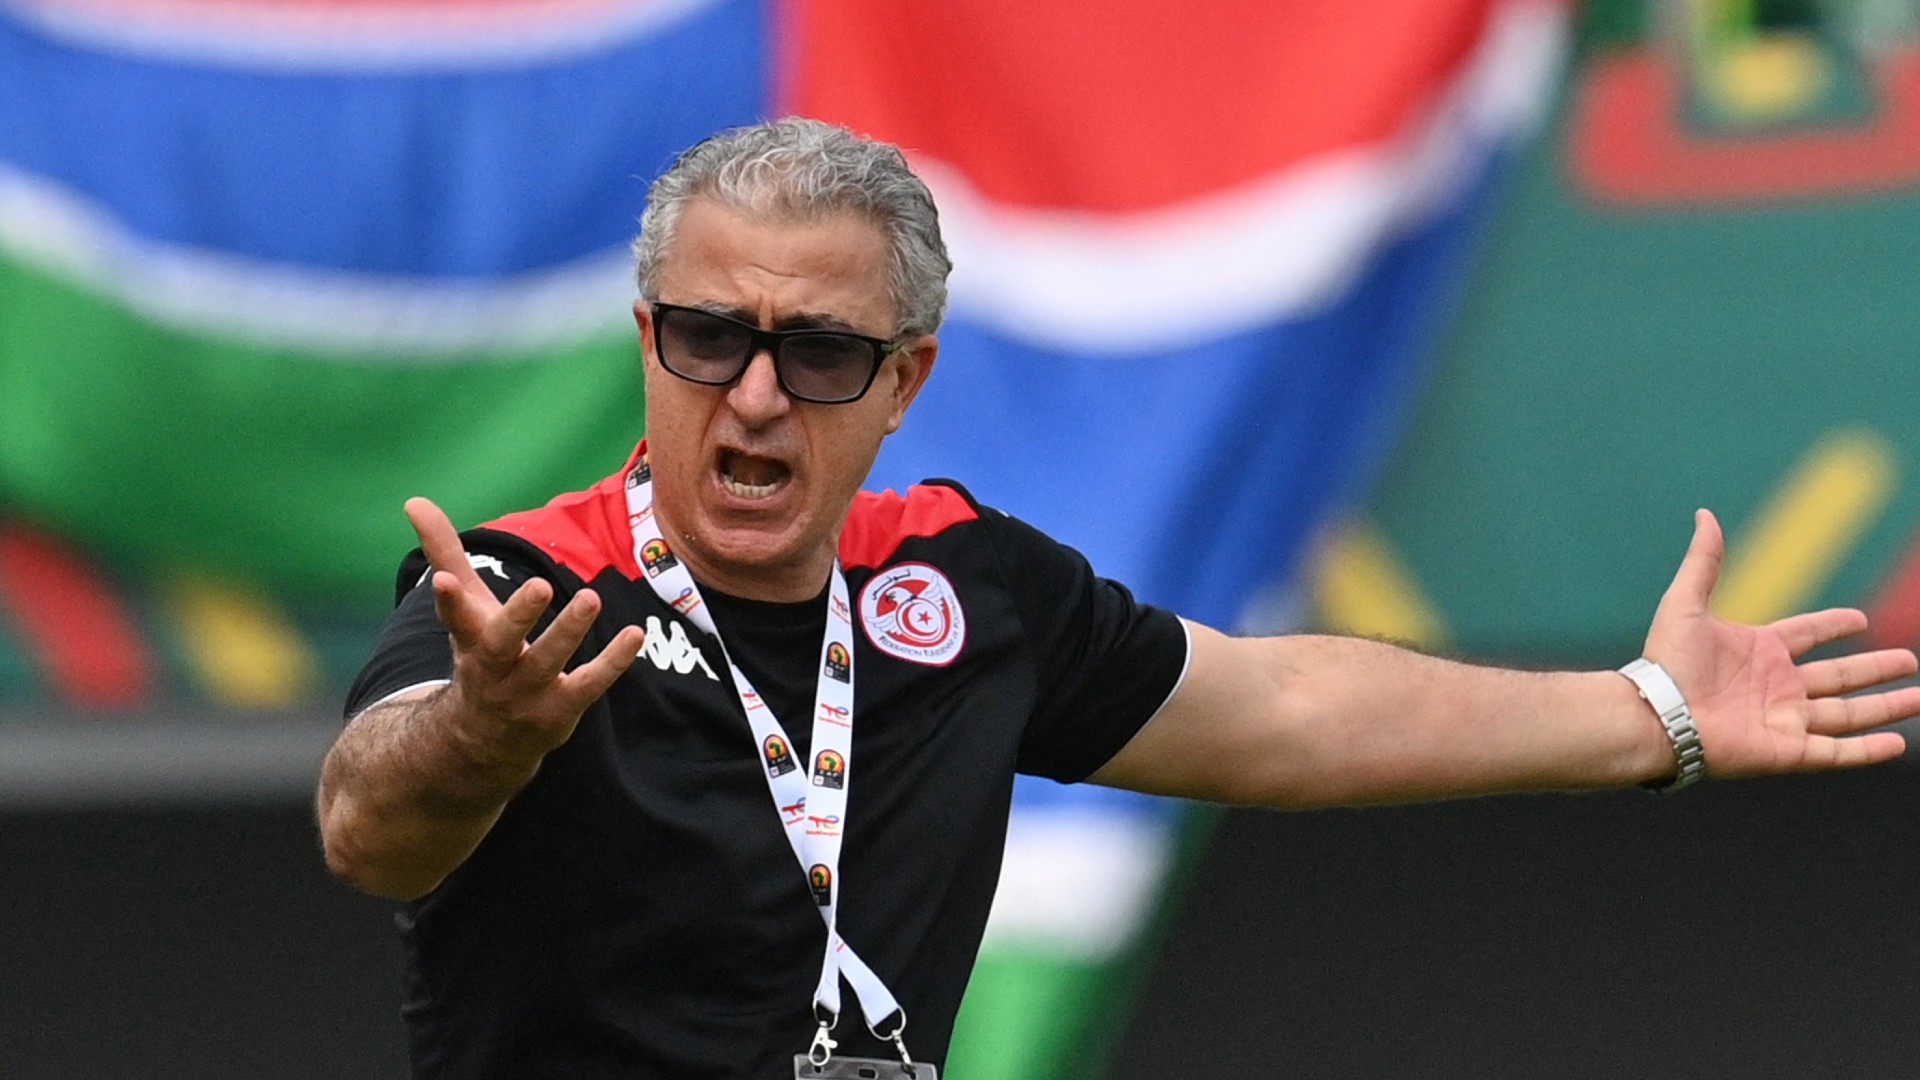 The chaos of the CAN referees: Explaining what happened at the end of Tunisia against Mali